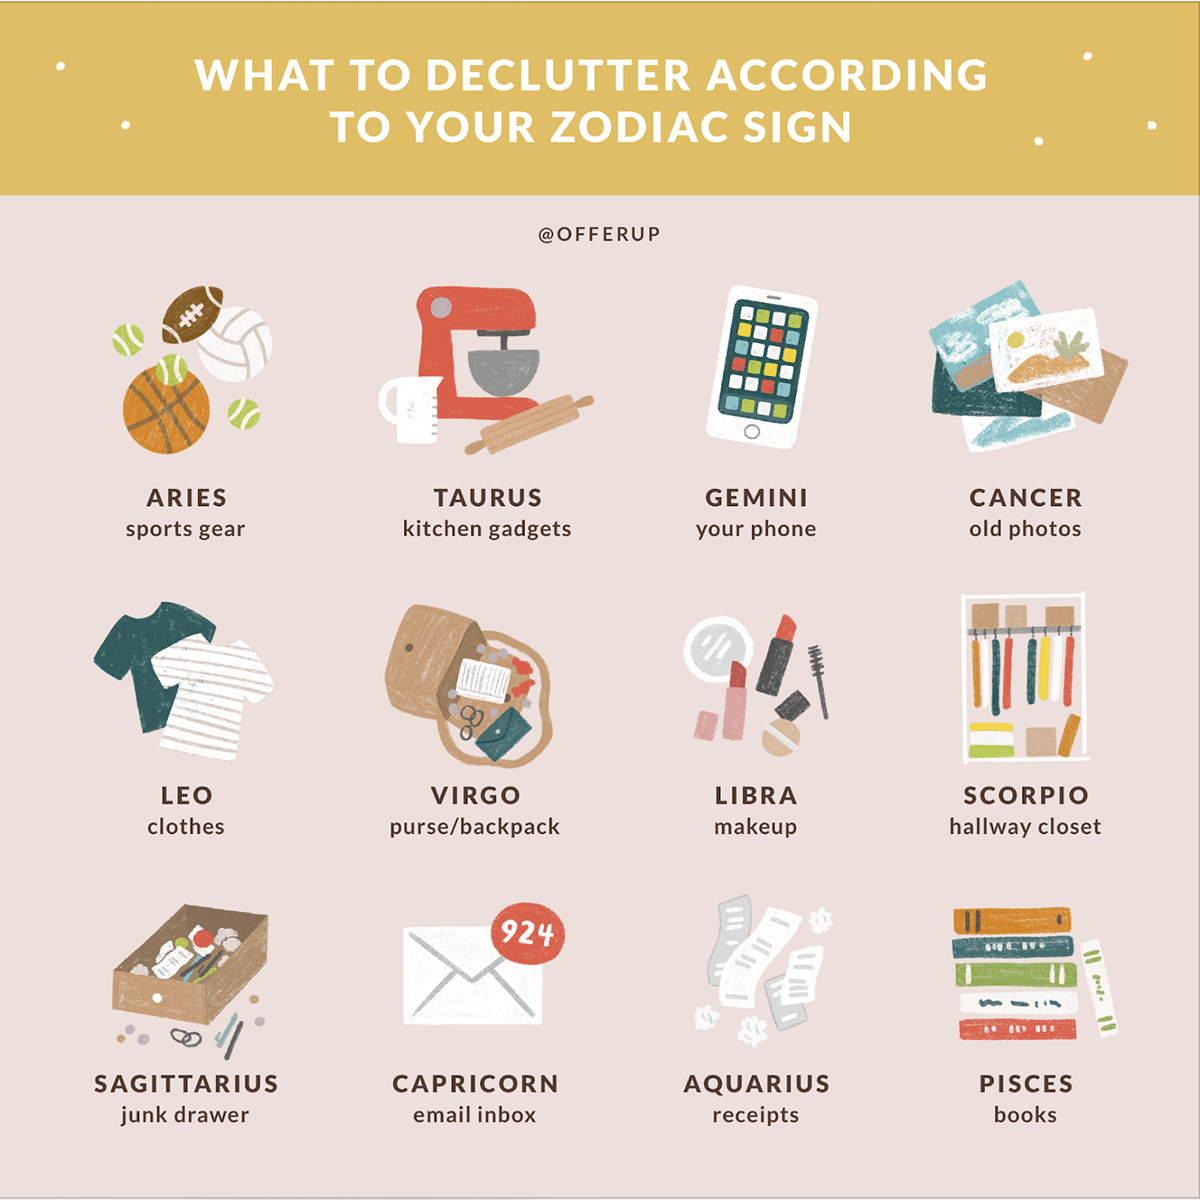 What to declutter according to your zodiac sign